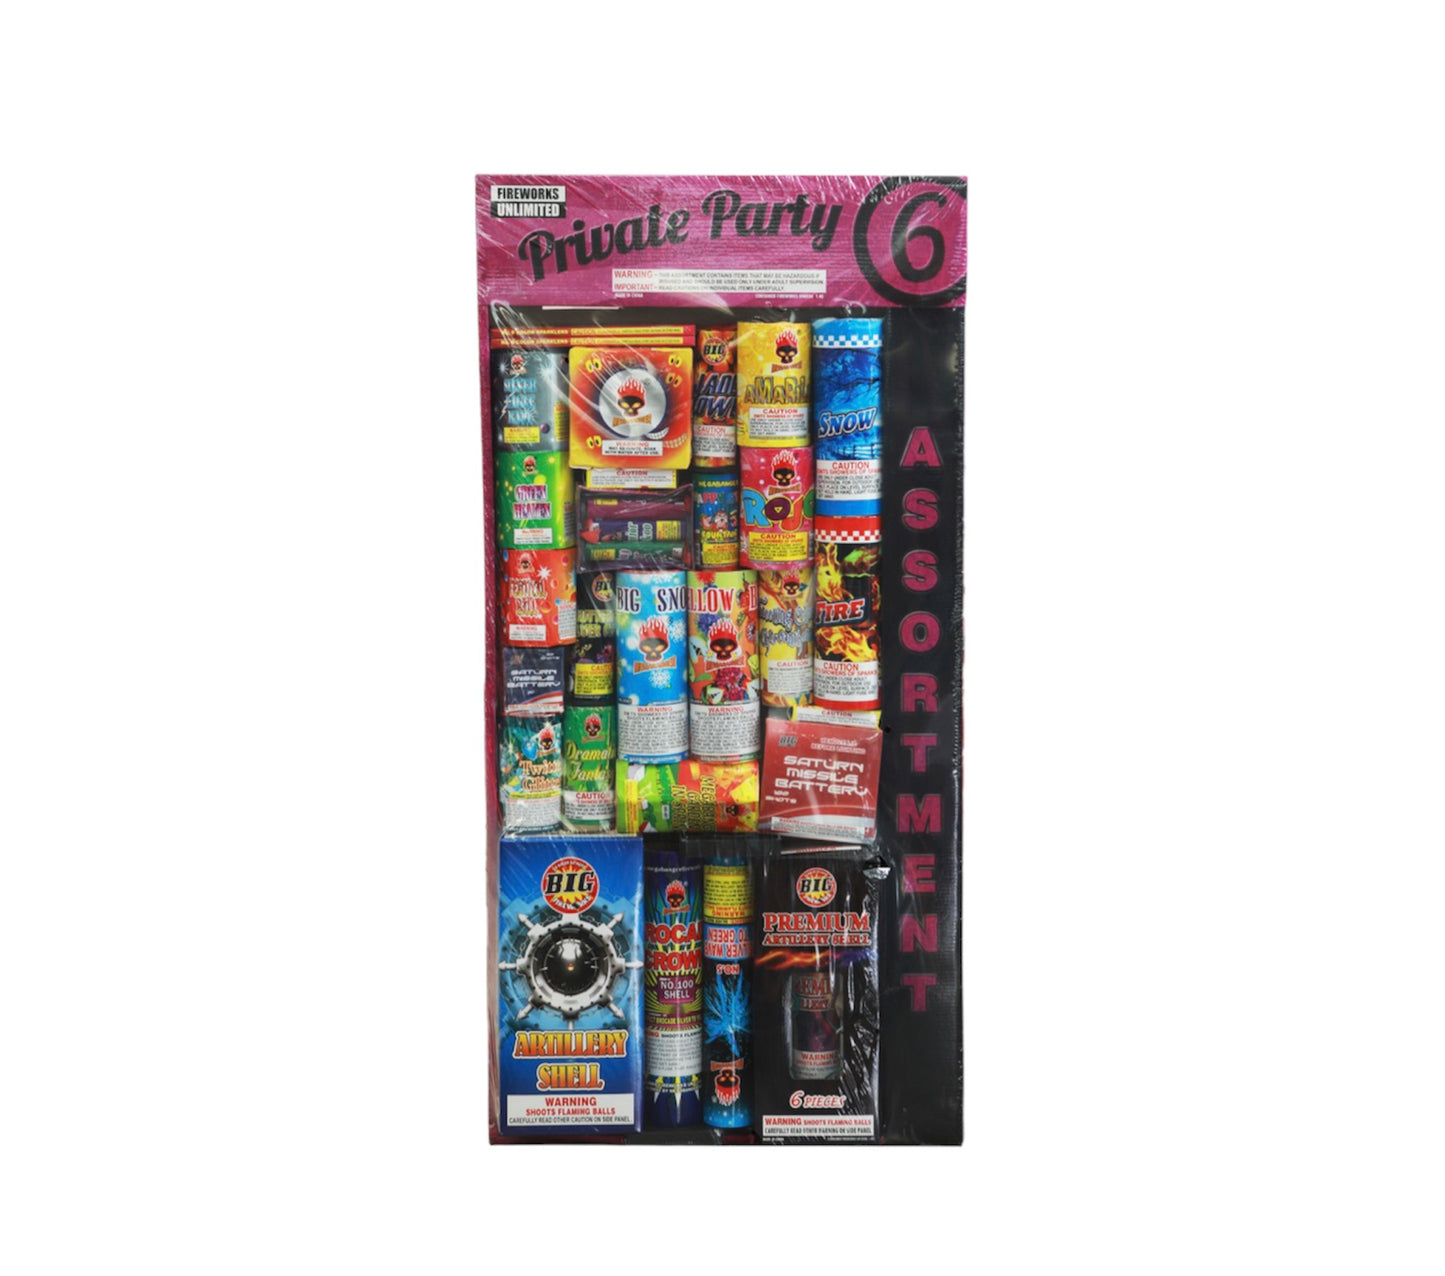 PRIVATE PARTY #6 ASSORTMENT KIT